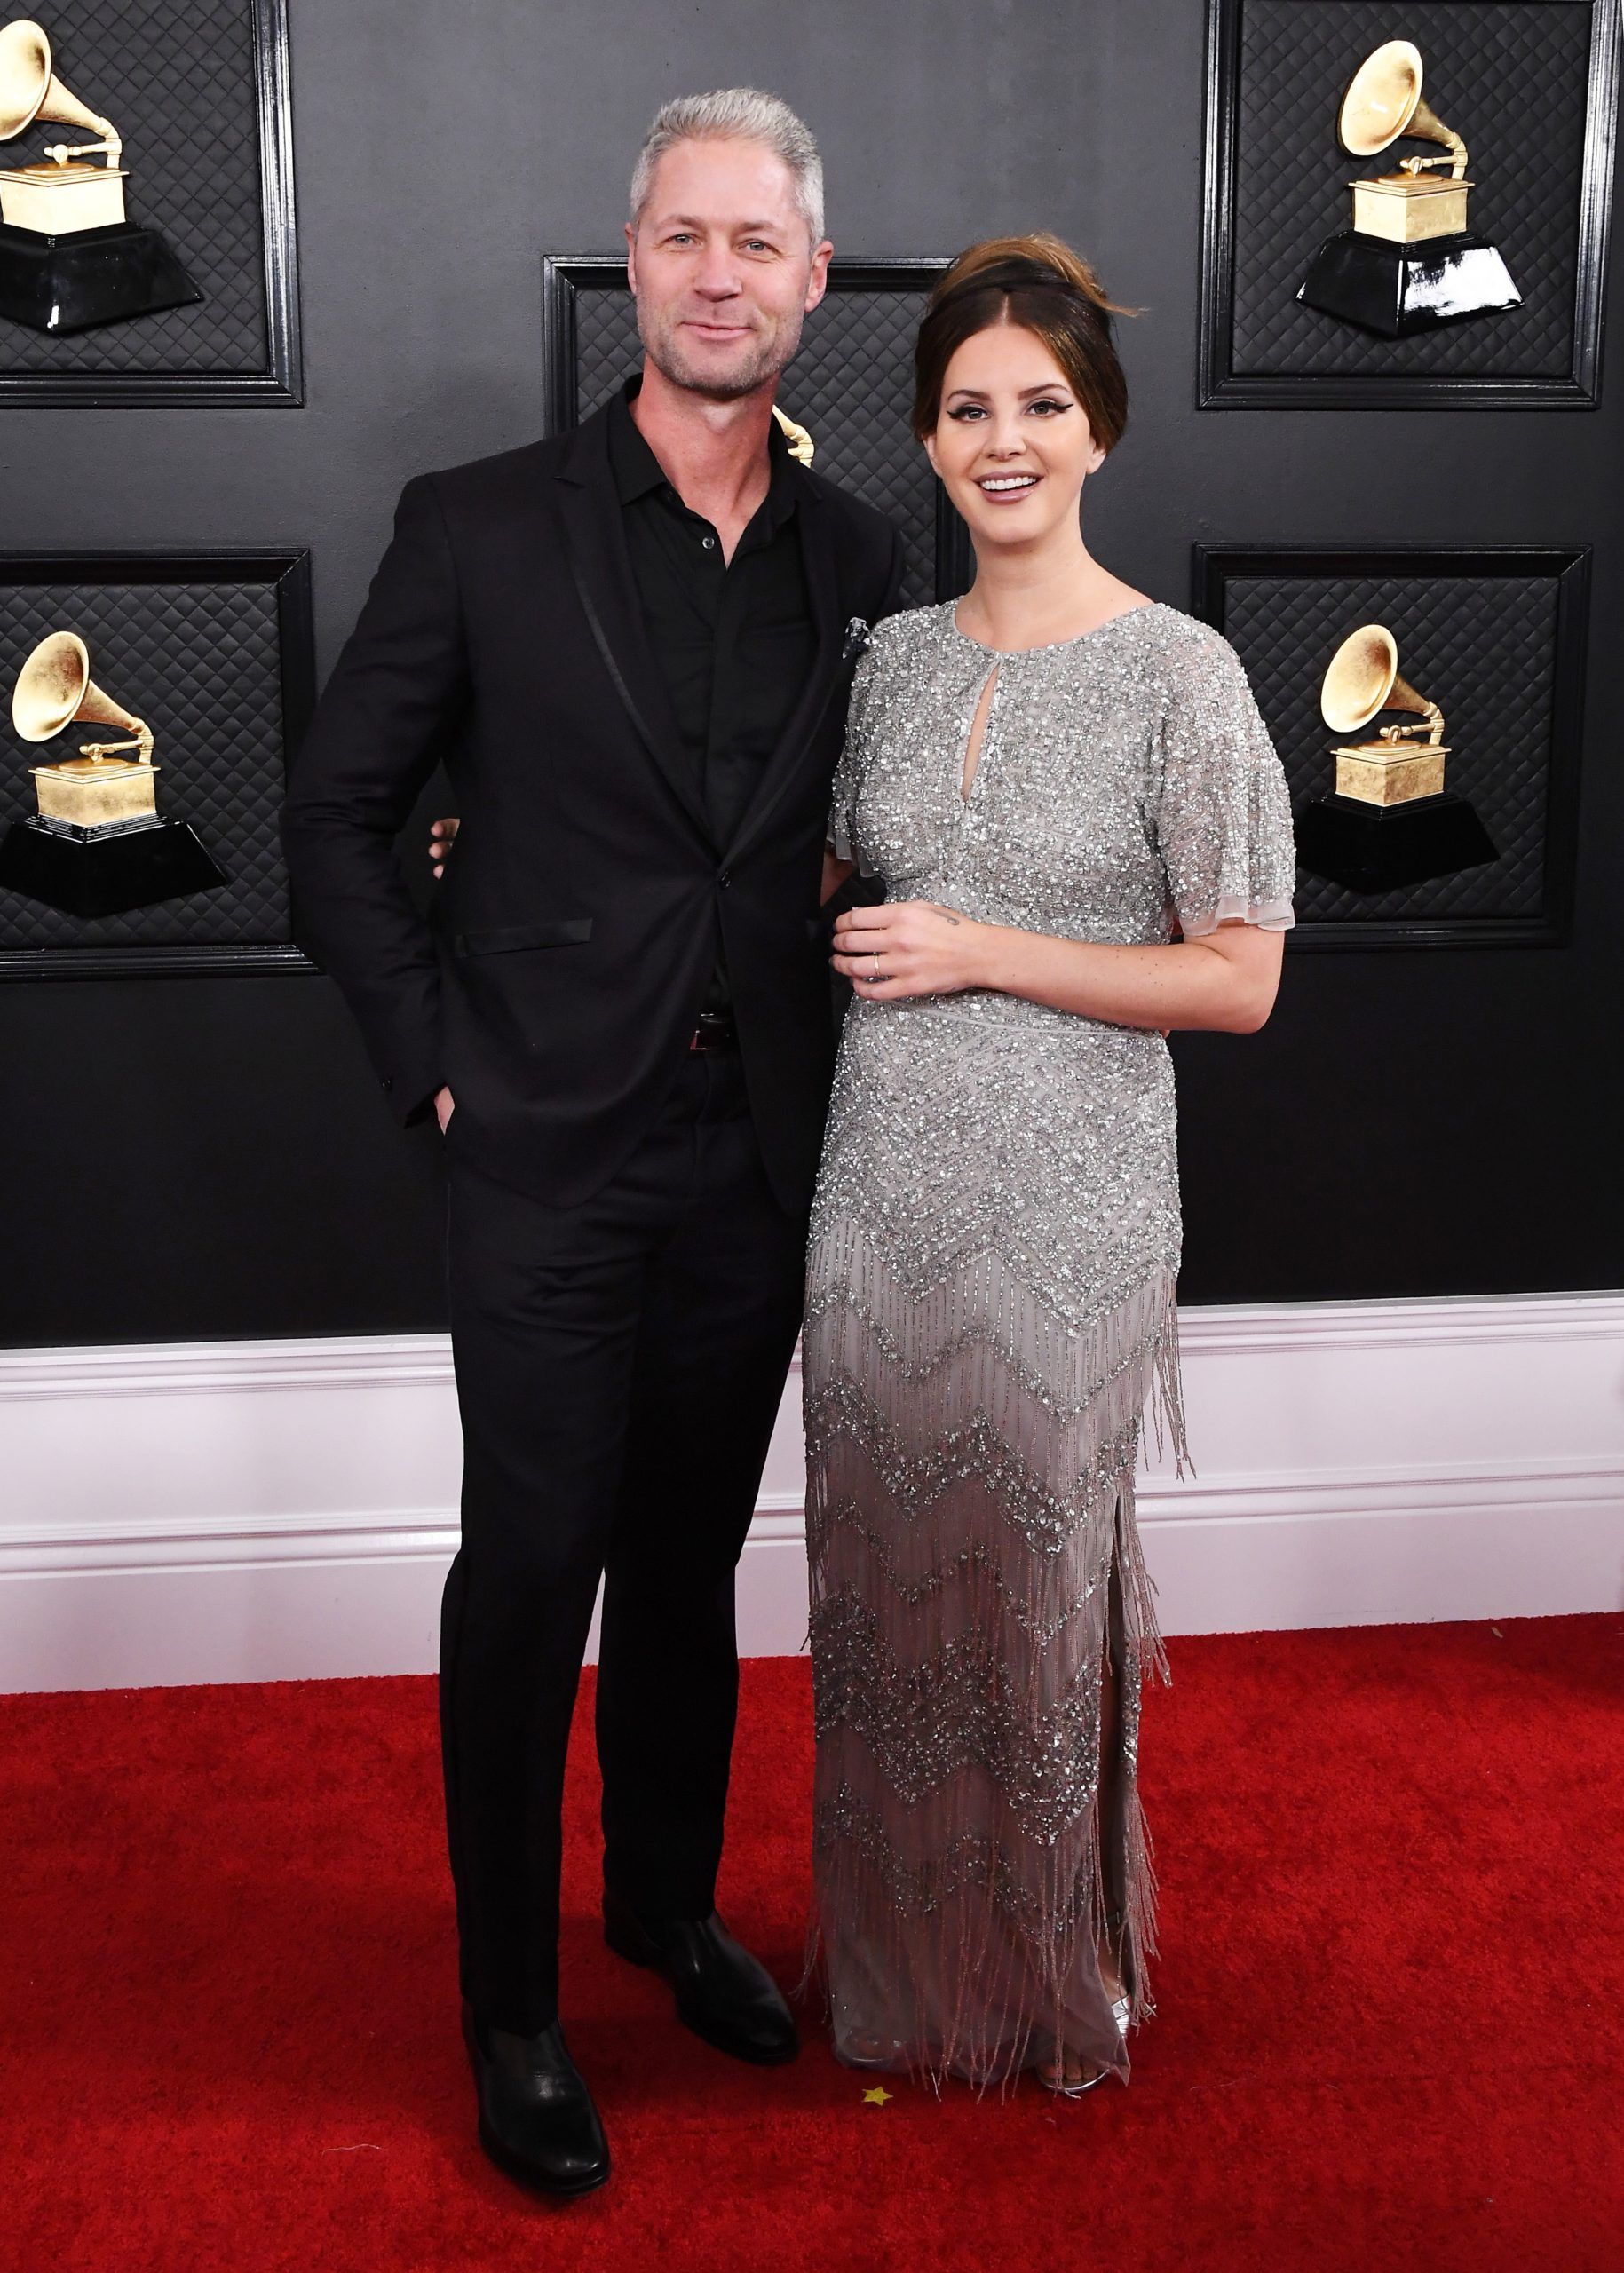 Lana Del Rey at the Grammys 2020 (Photo credit: Getty Images)